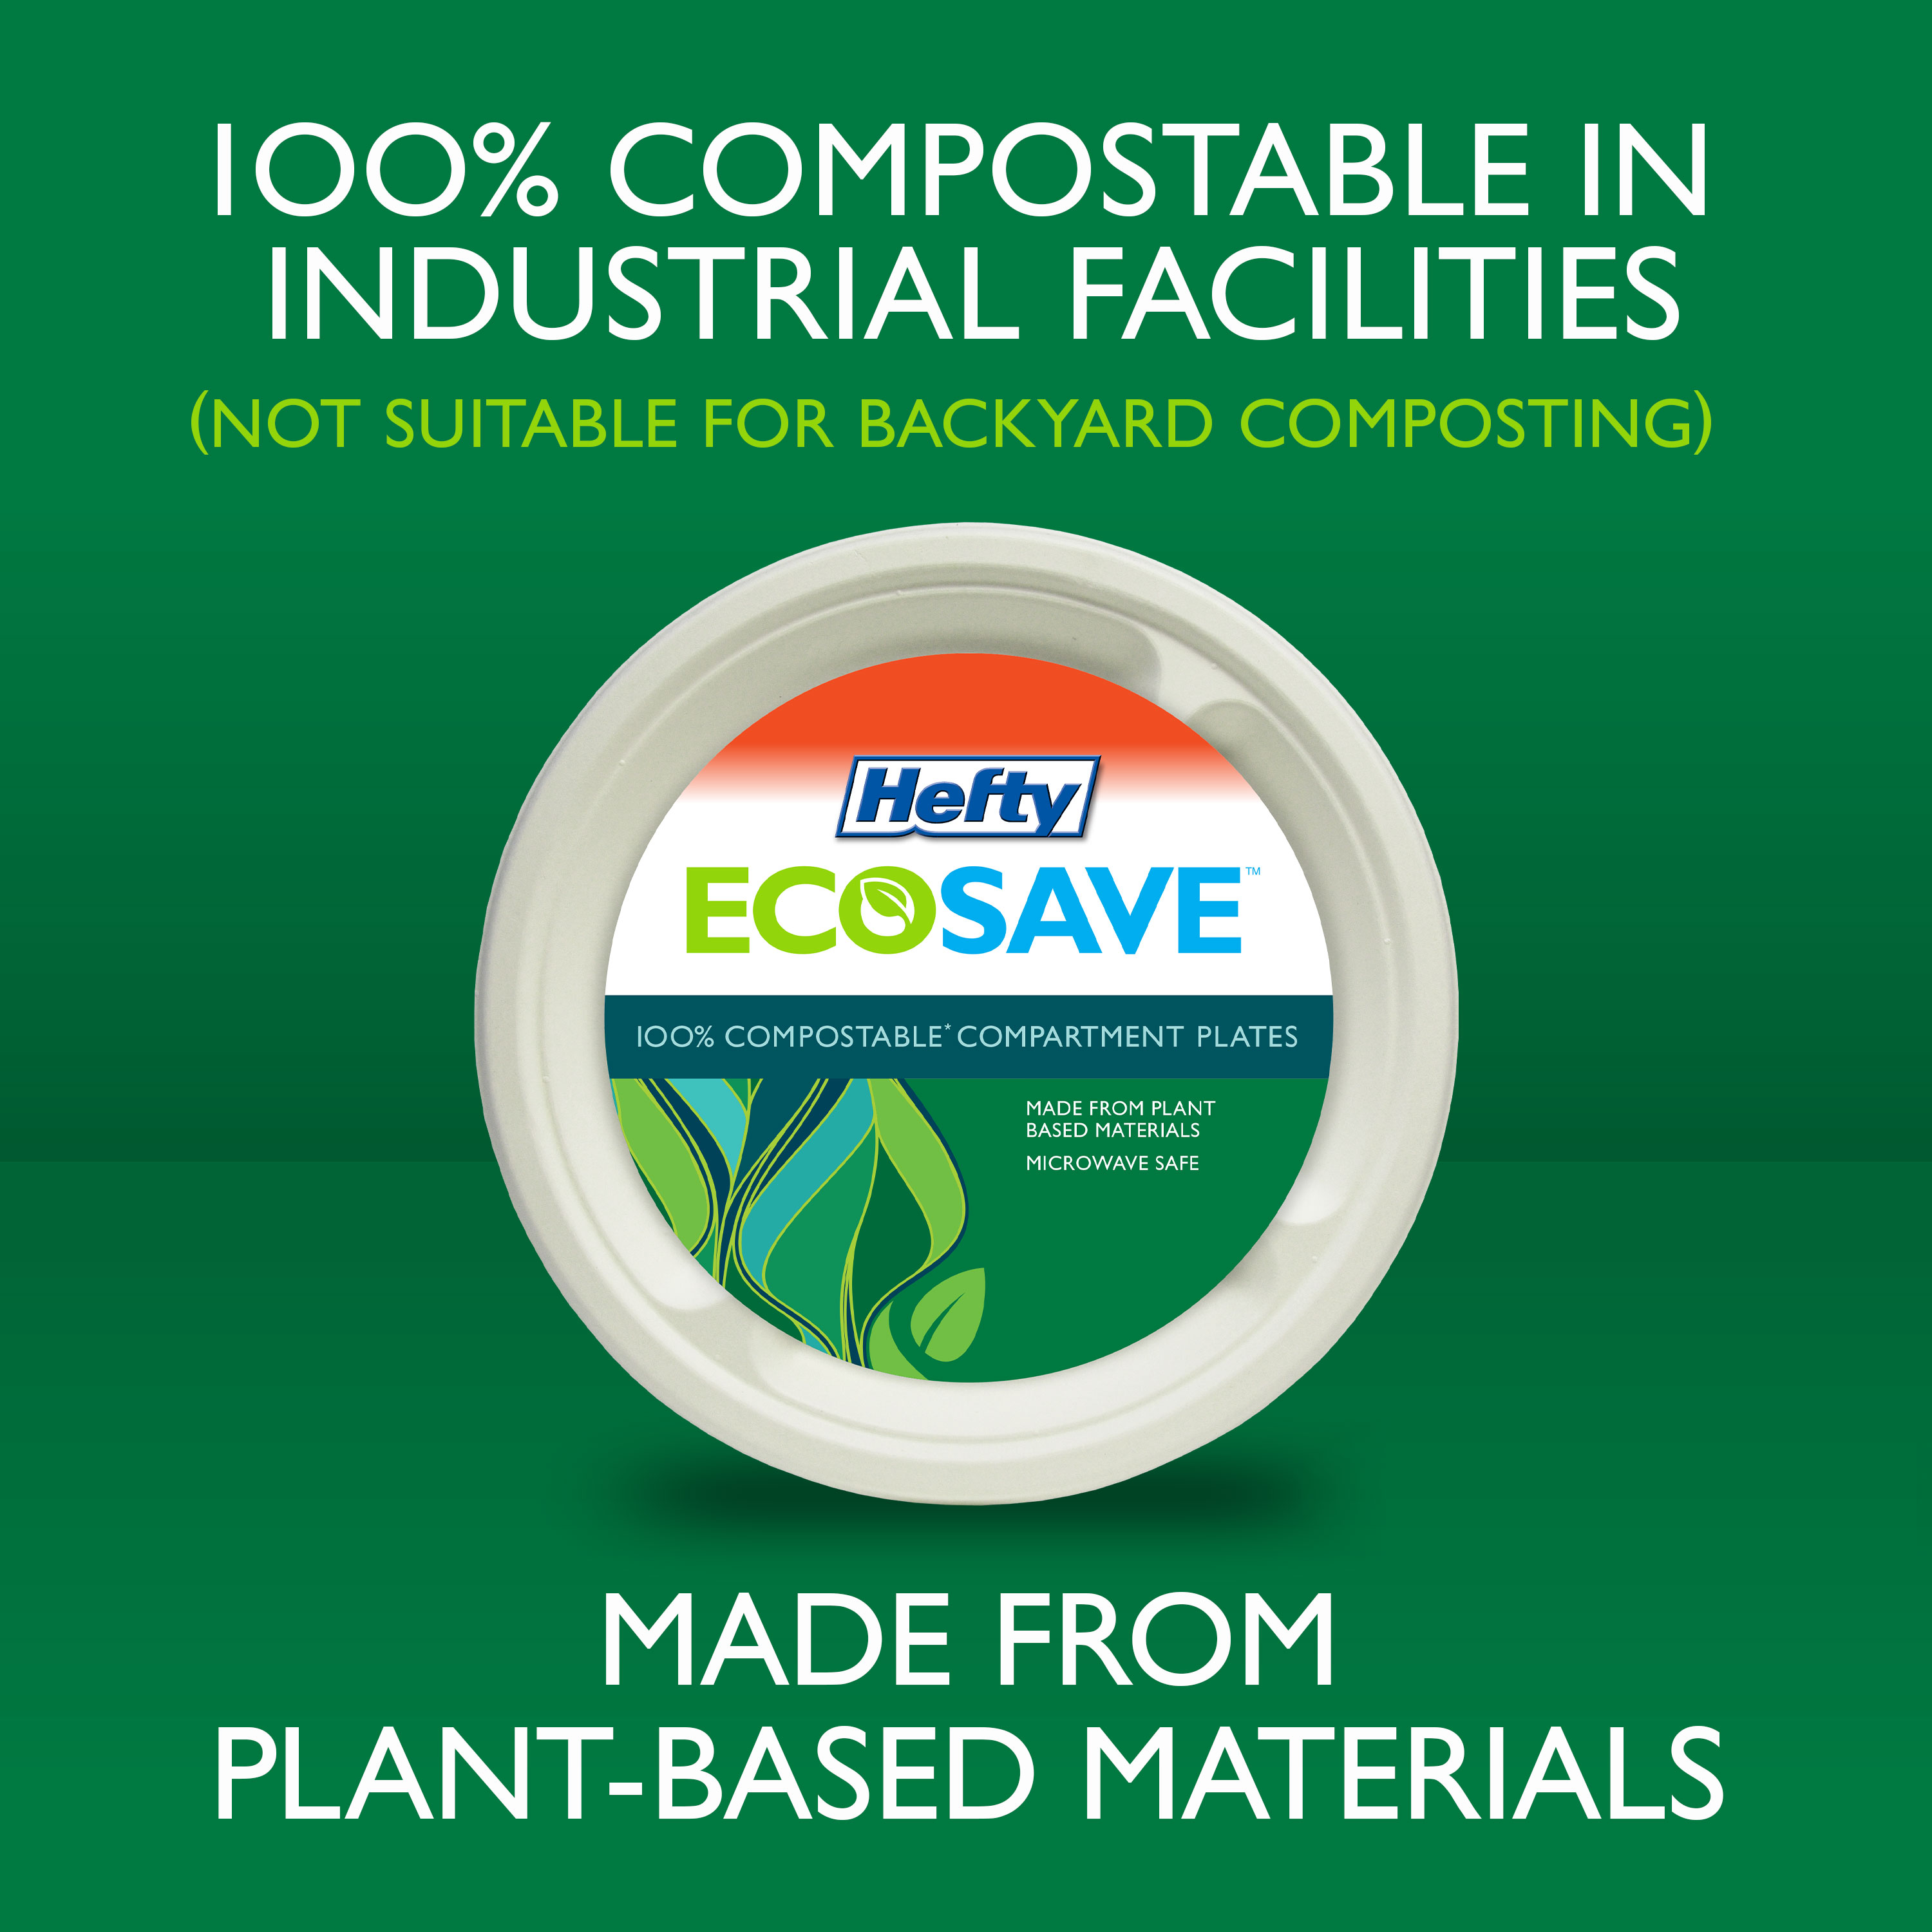 Hefty ECOSAVE Compostable Paper Plates, 10-1/8 inch, 16 Count - image 3 of 7